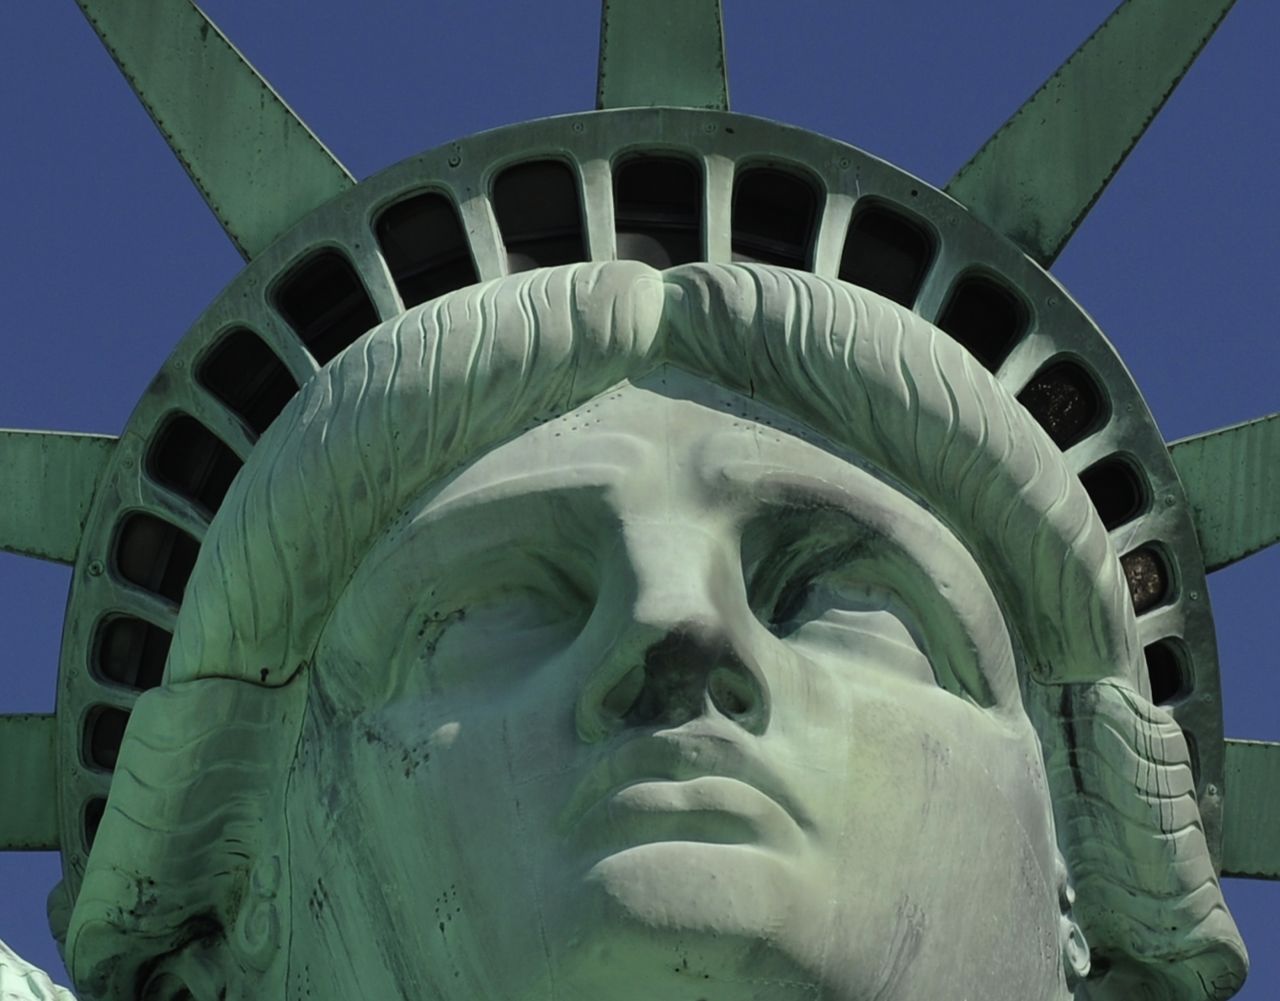 The statue's crown reopens to the public on July 4, 2008. It had been closed since the September 11 attacks.